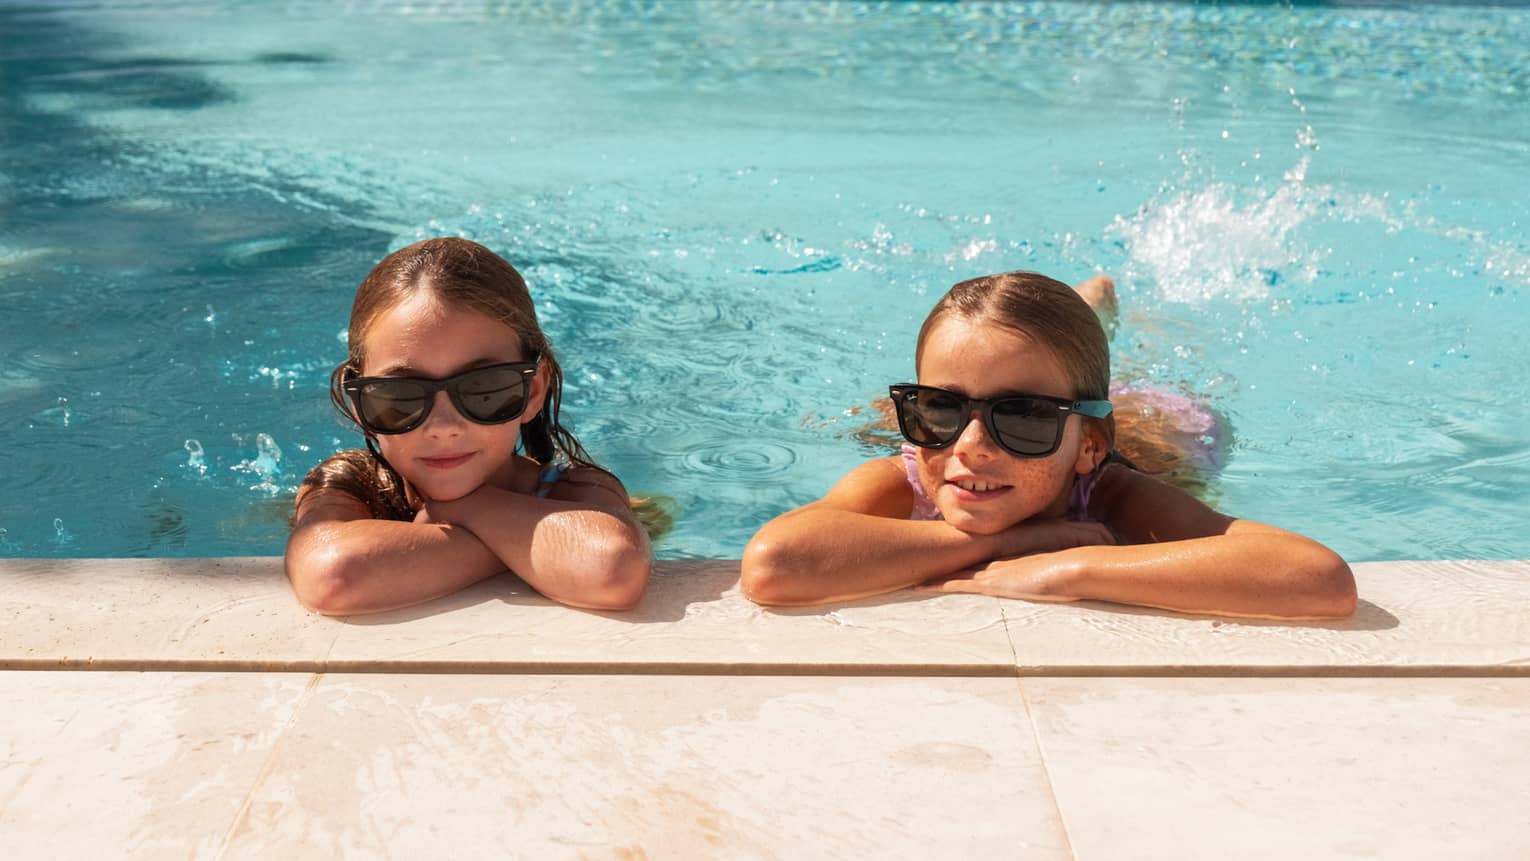 Two kids wearing sunglasses and swimming in the pool.